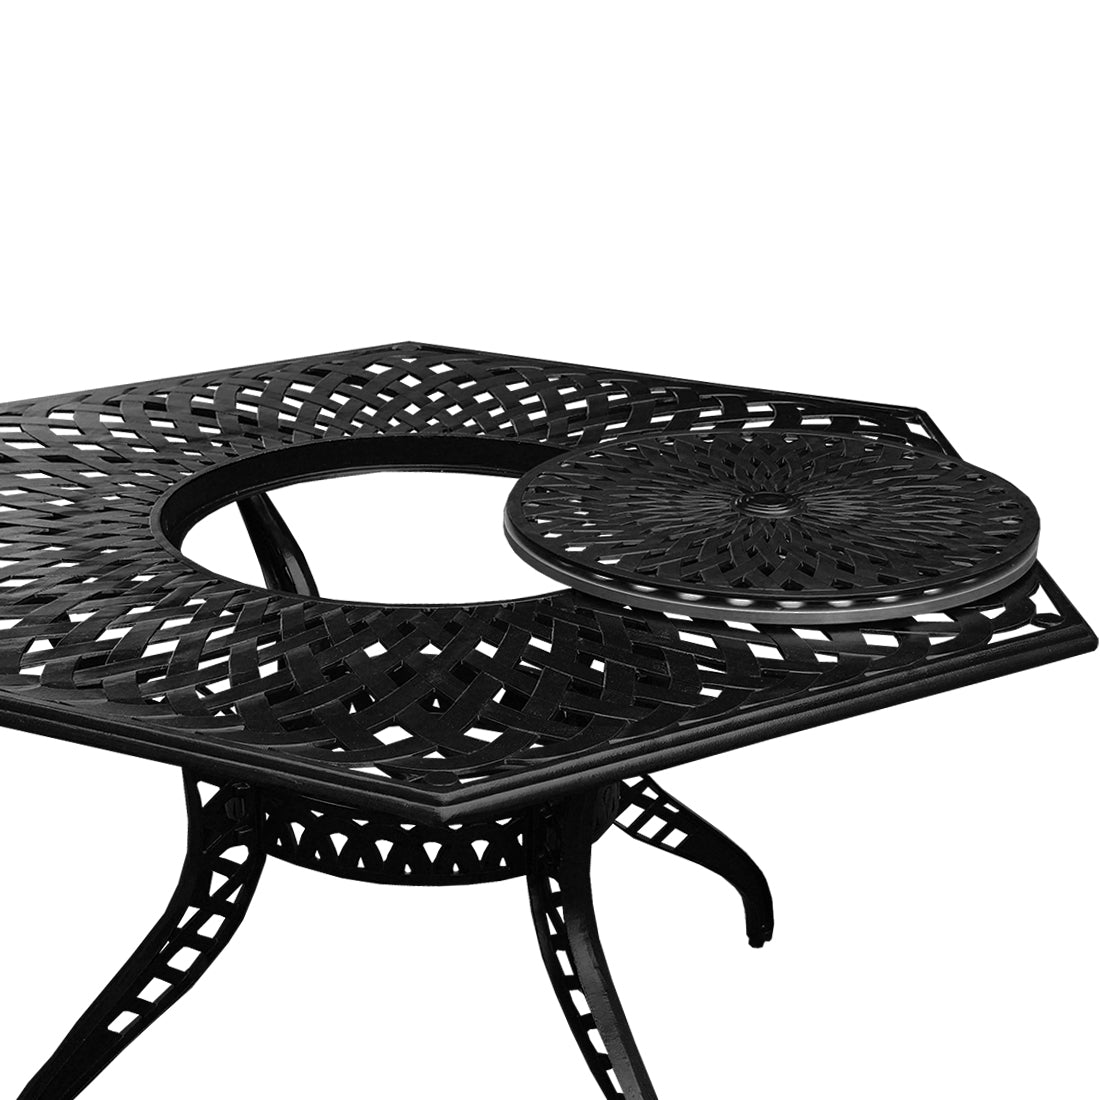 Outdoor Modern Aluminum 63-in Hexagon Patio Dining Table, Lazy Susan